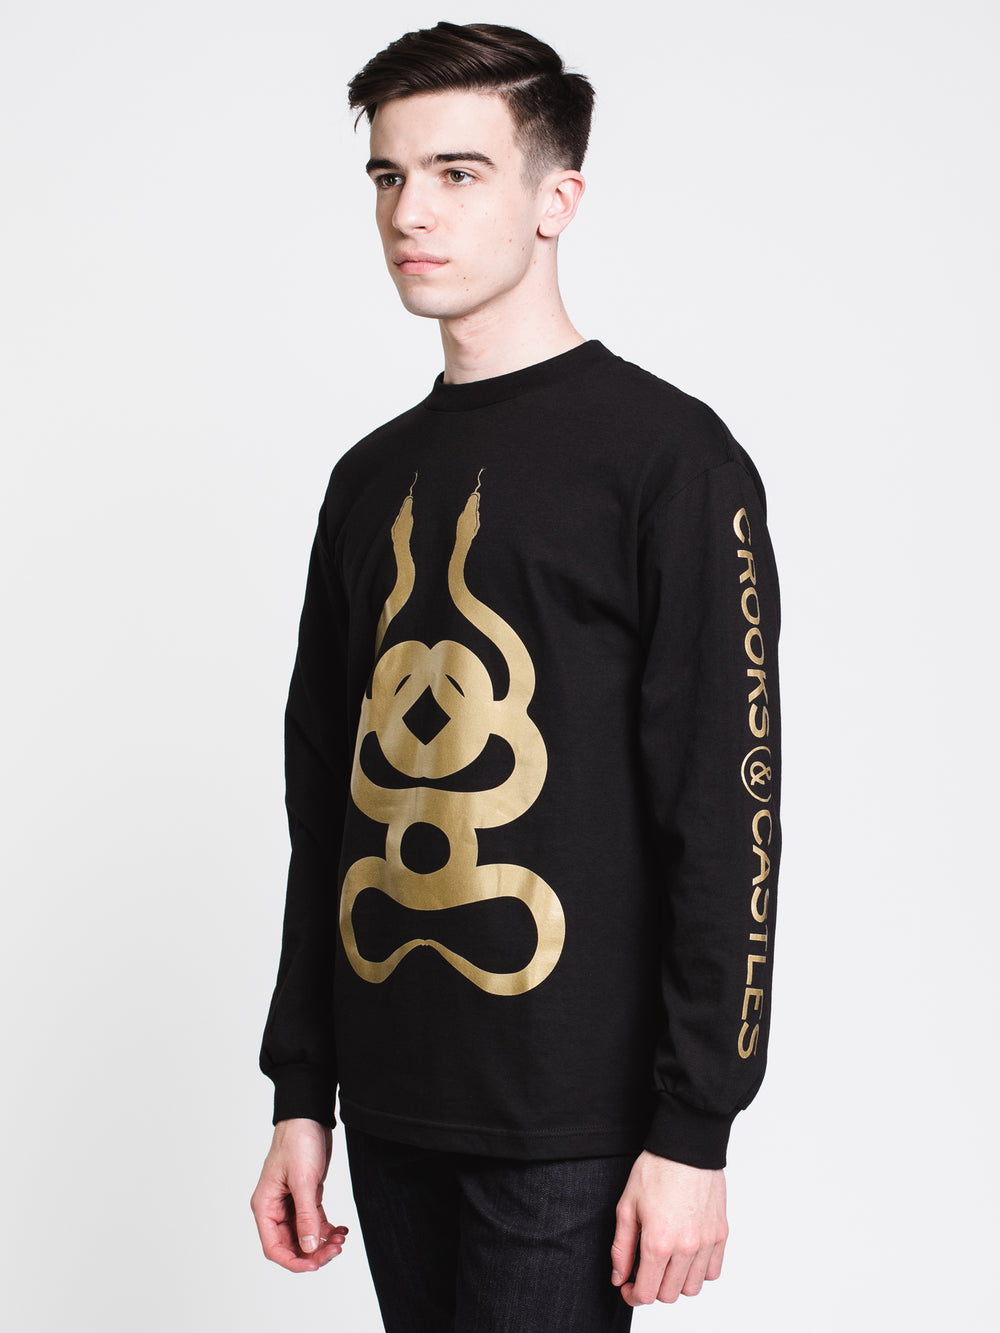 MENS GOLD DUEL SNAKES LONG SLEEVE T-SHIRT - BLACK - CLEARANCE